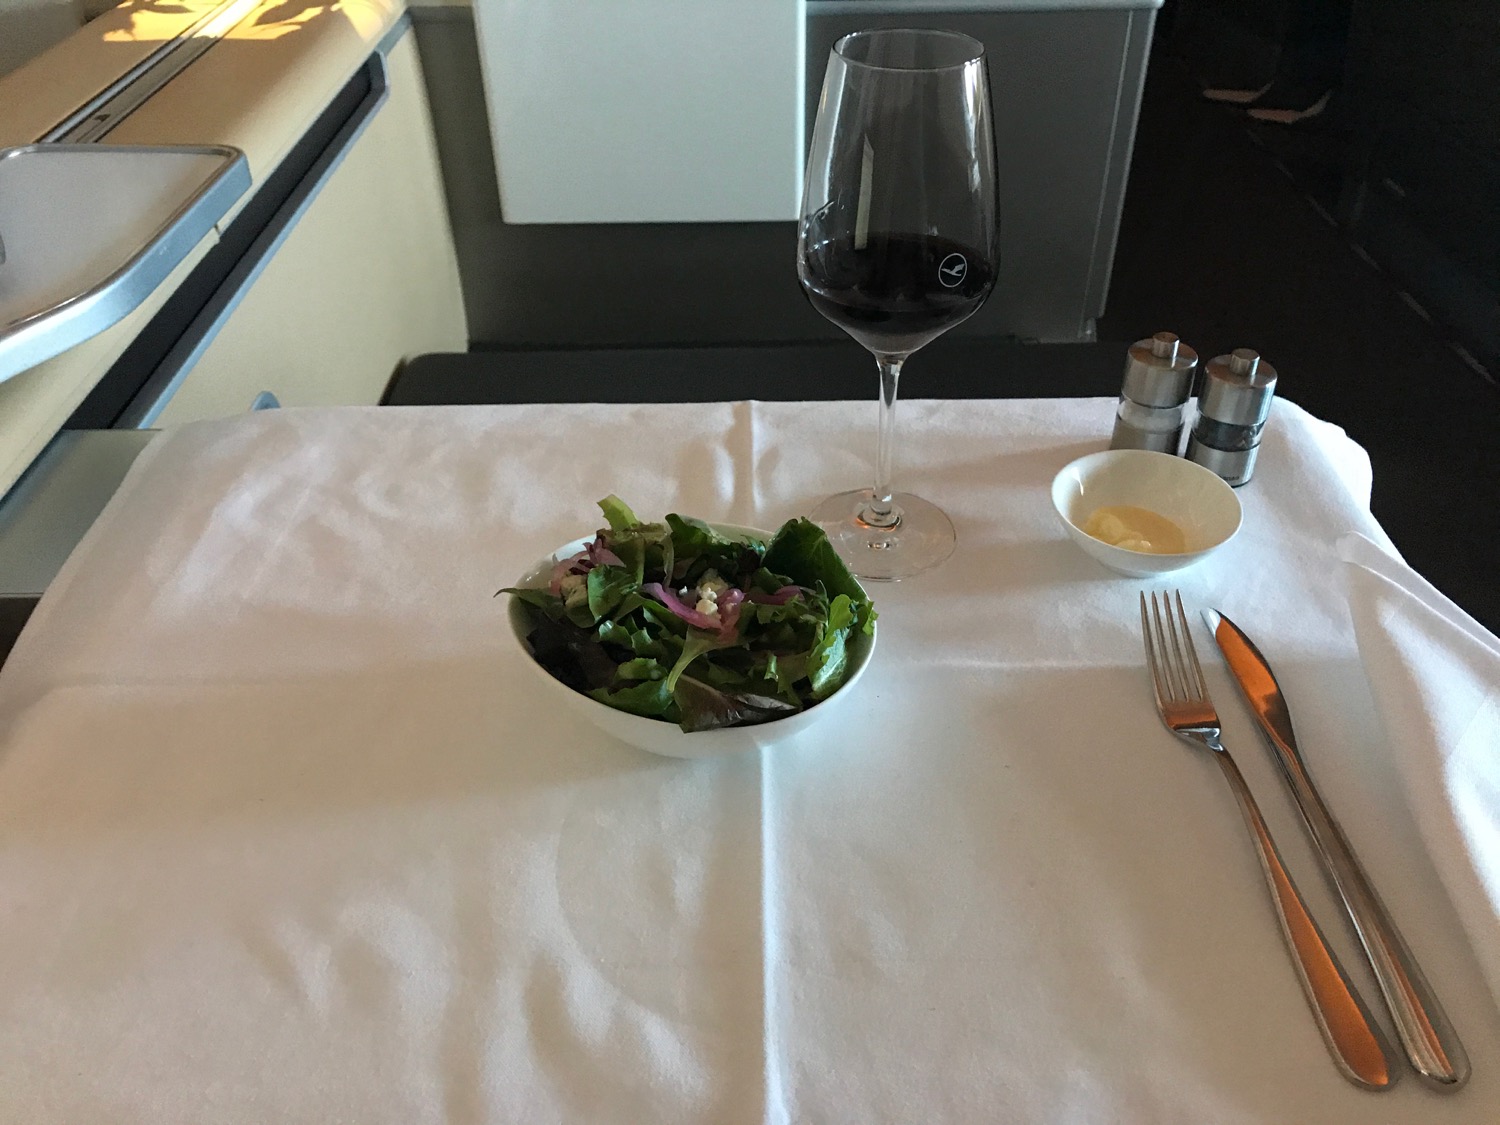 a salad bowl and a glass of wine on a table